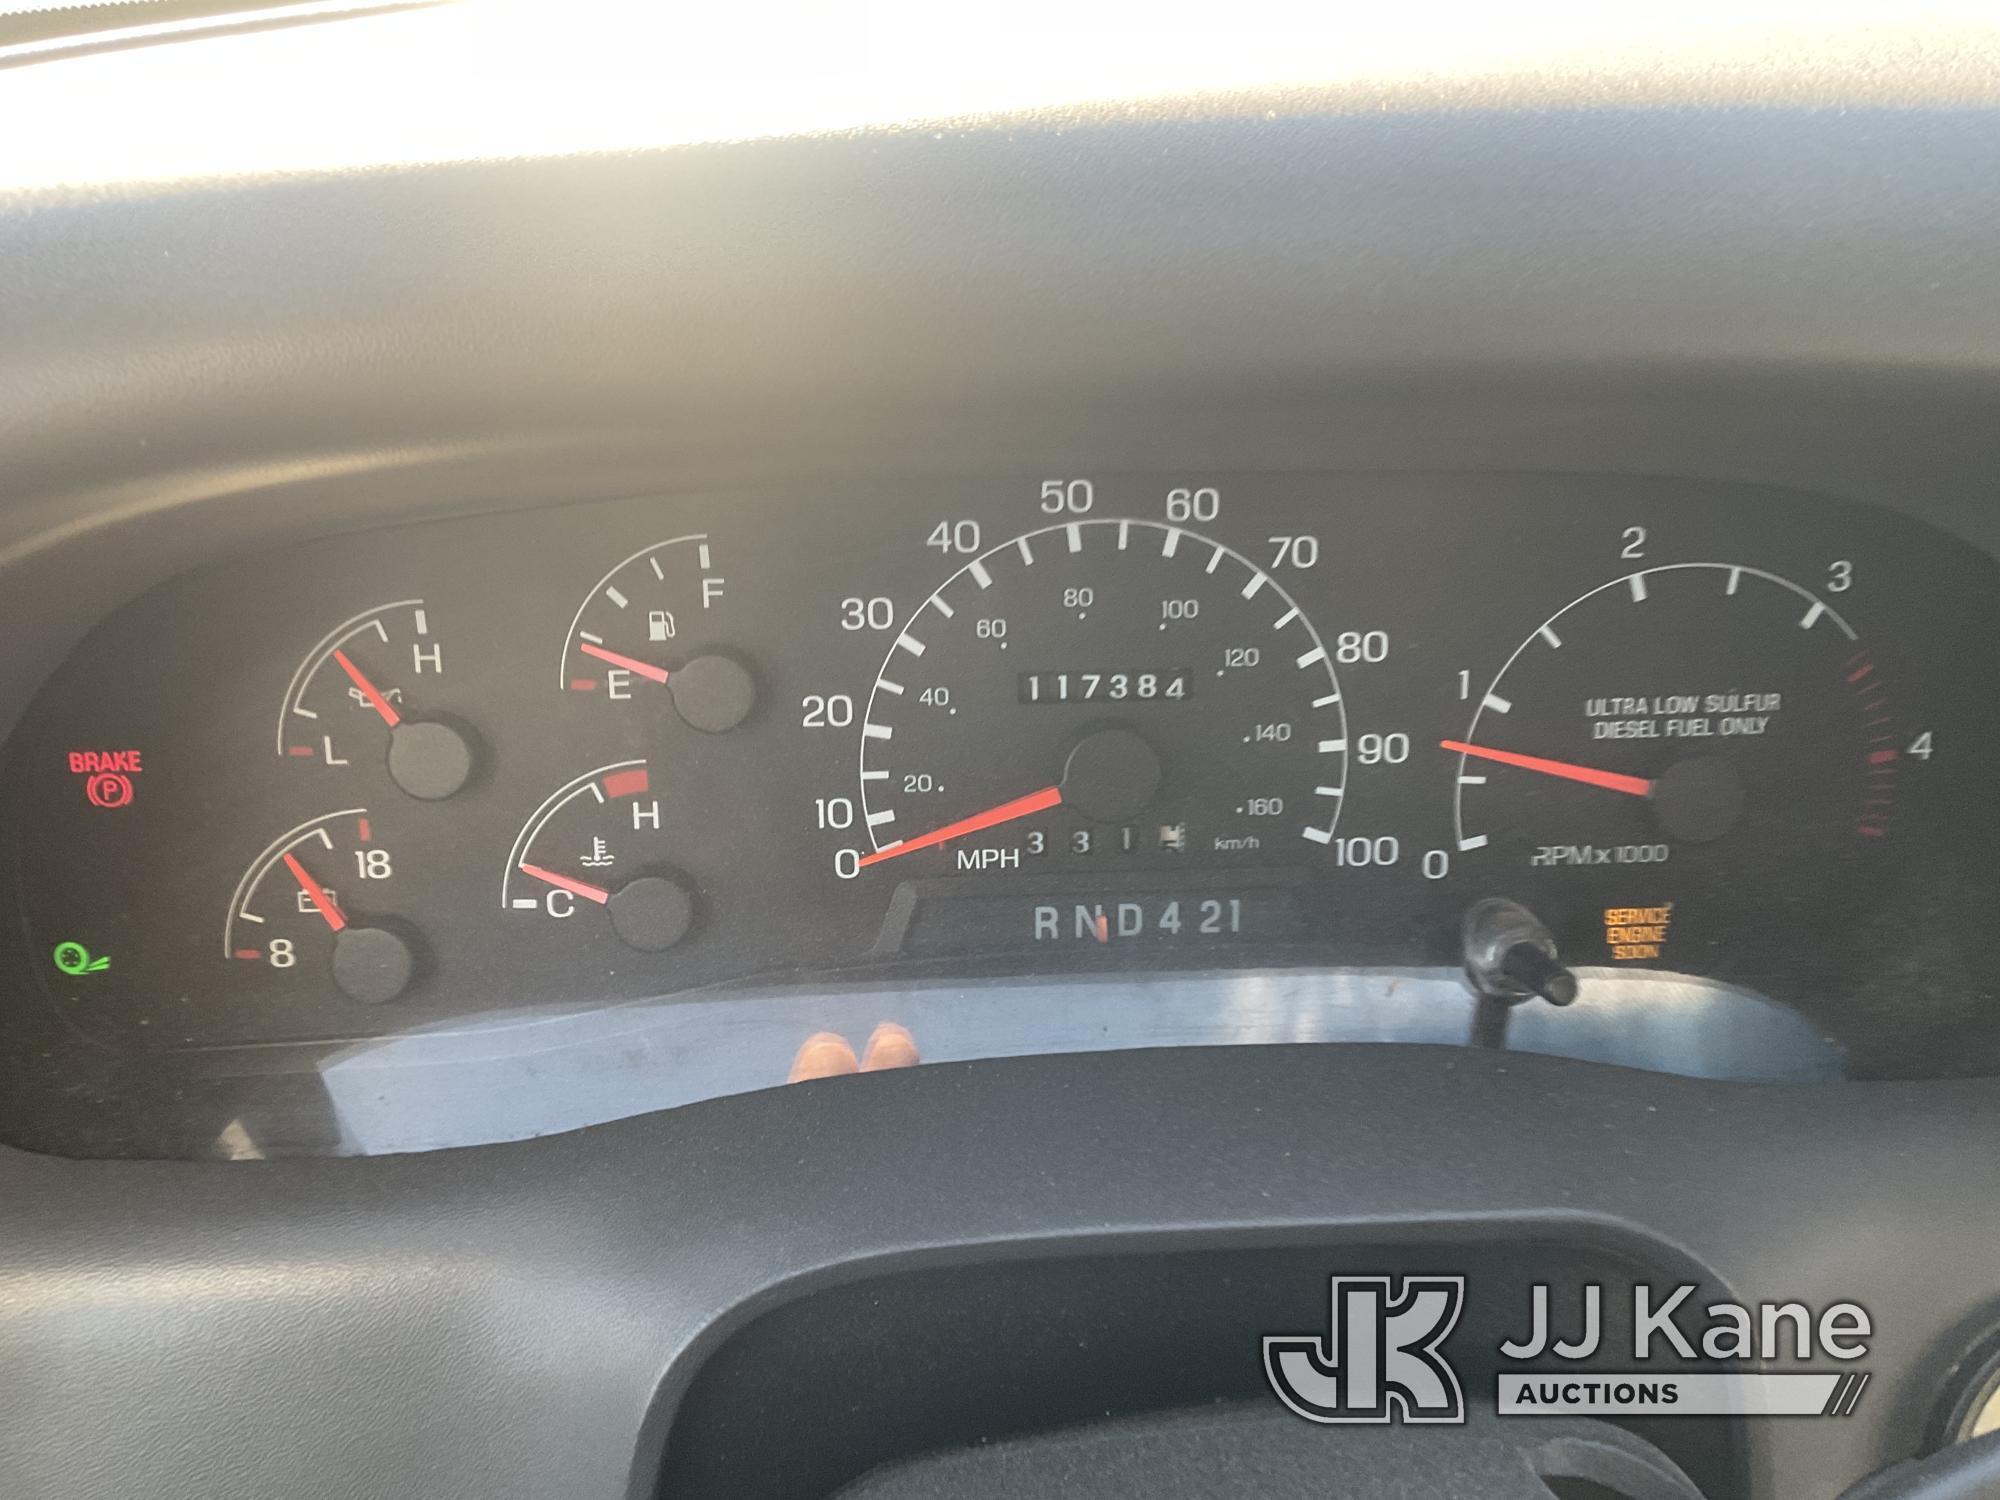 (Jurupa Valley, CA) 2010 Ford F650 Crew Cab Van Body Truck Must Be Registered Out Of State Due To CA